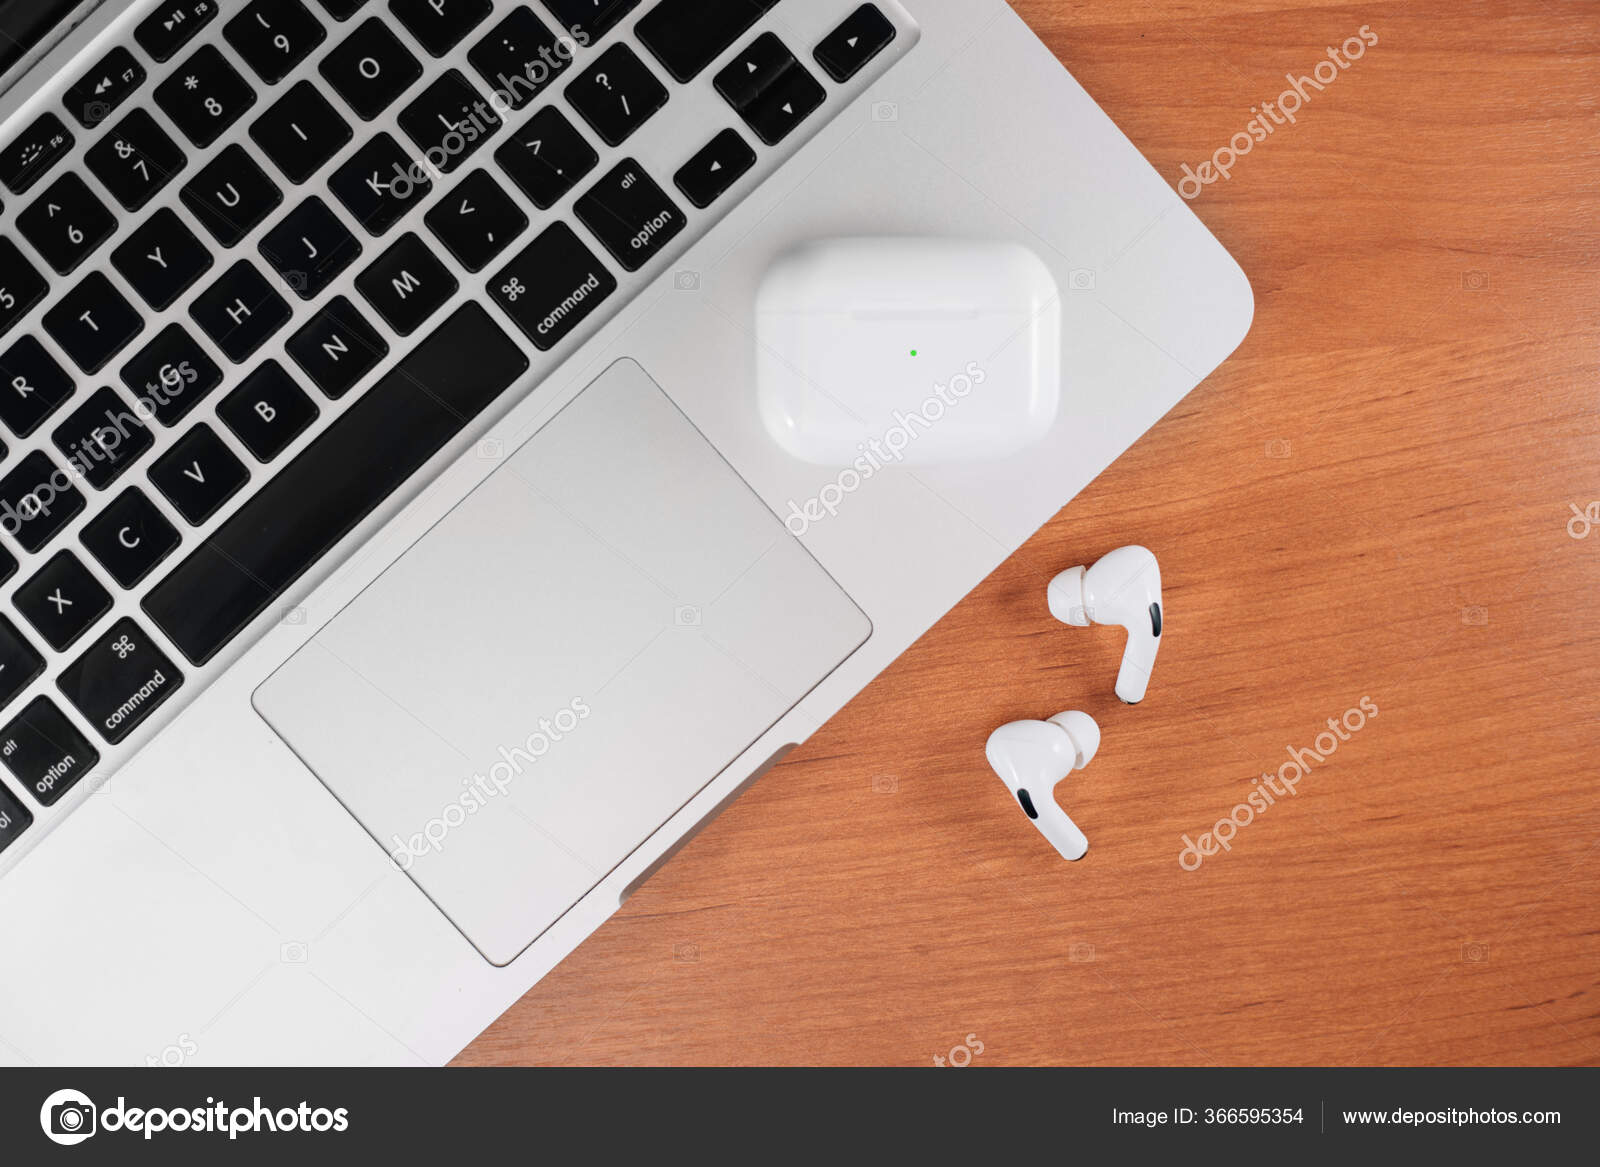 Air Pods Pro Macbook Wireless Charging Case New Airpods Pro Stock Photo By C Ivan Shenets